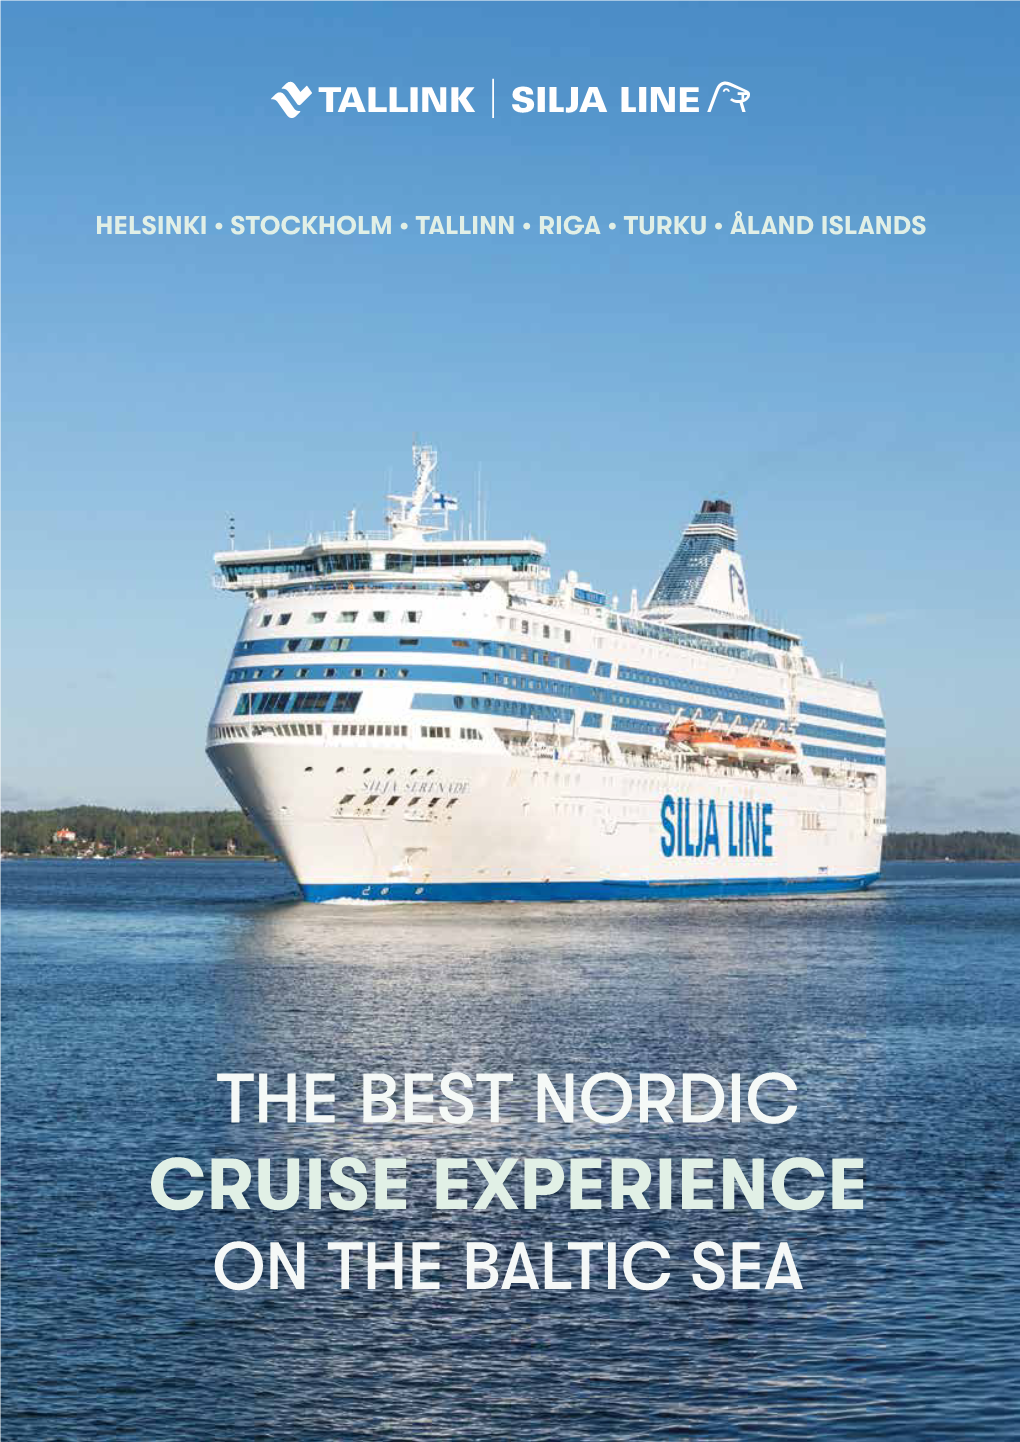 Cruise Experience on the Baltic Sea